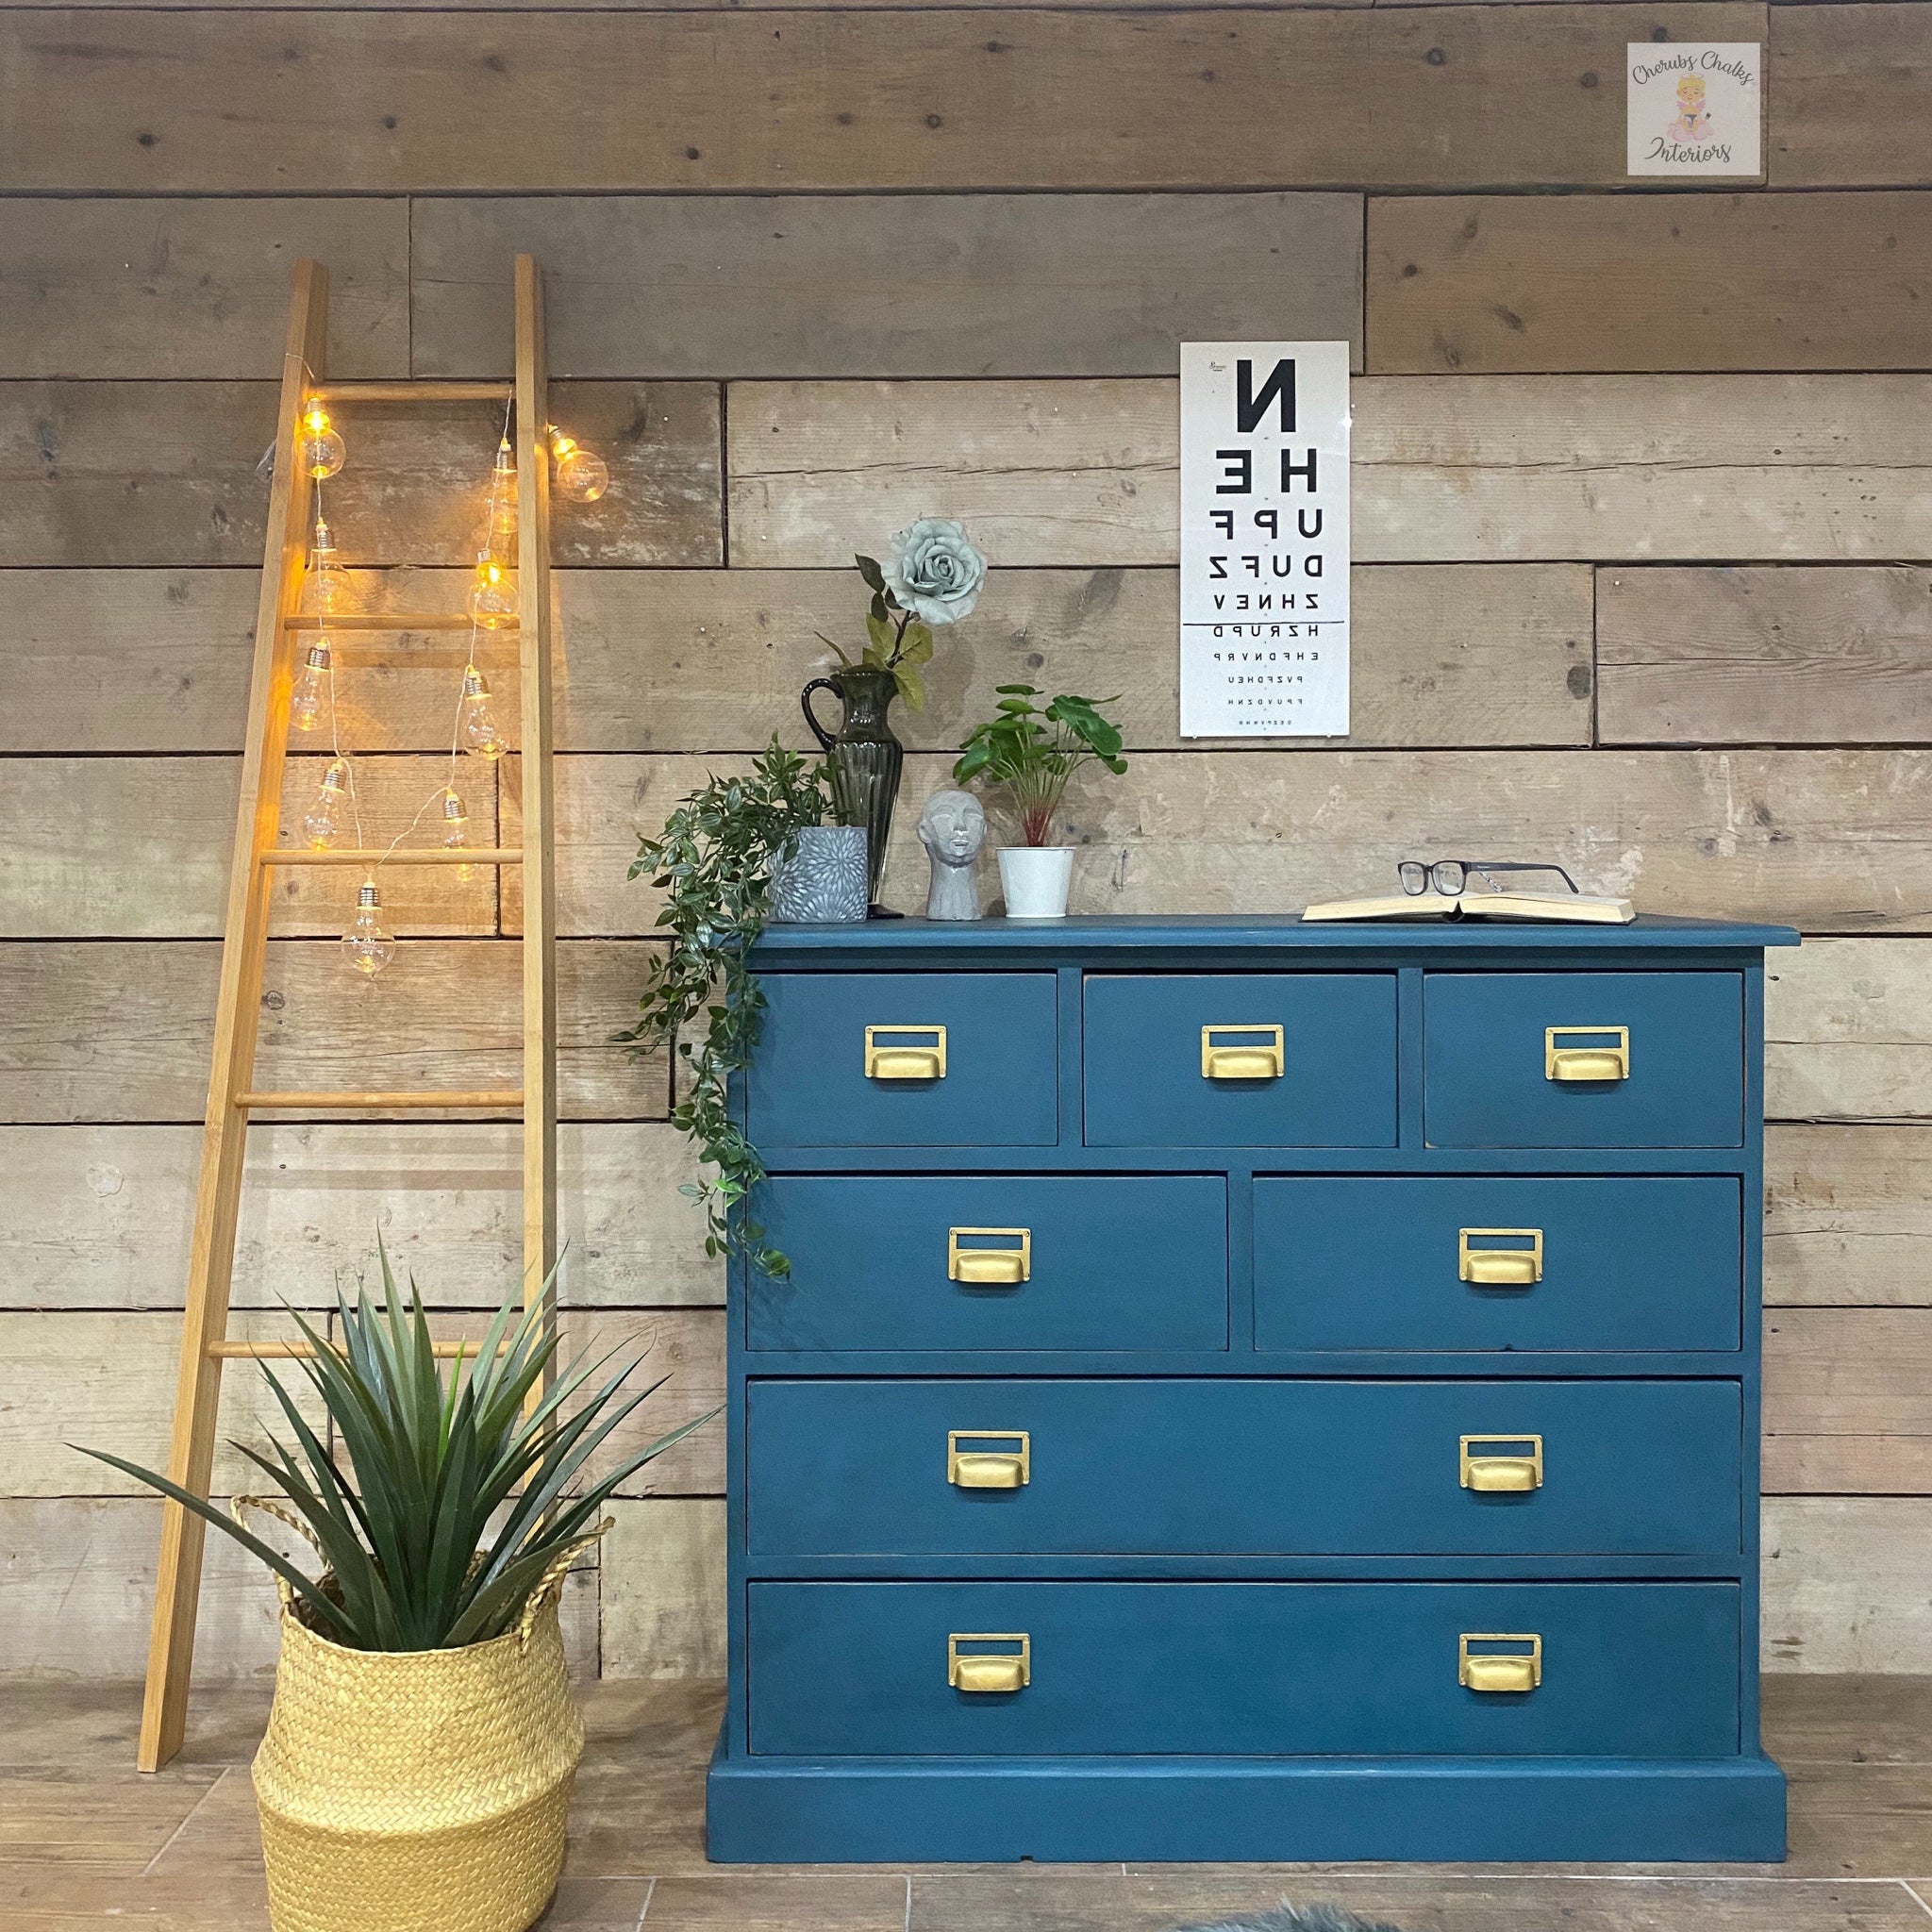 A vintage 7-drawer dresser with gold drawer pulls refurbished by Cherubs Chalks Interiors is painted with Dixie Belle's Antebellum Blue chalk mineral paint.